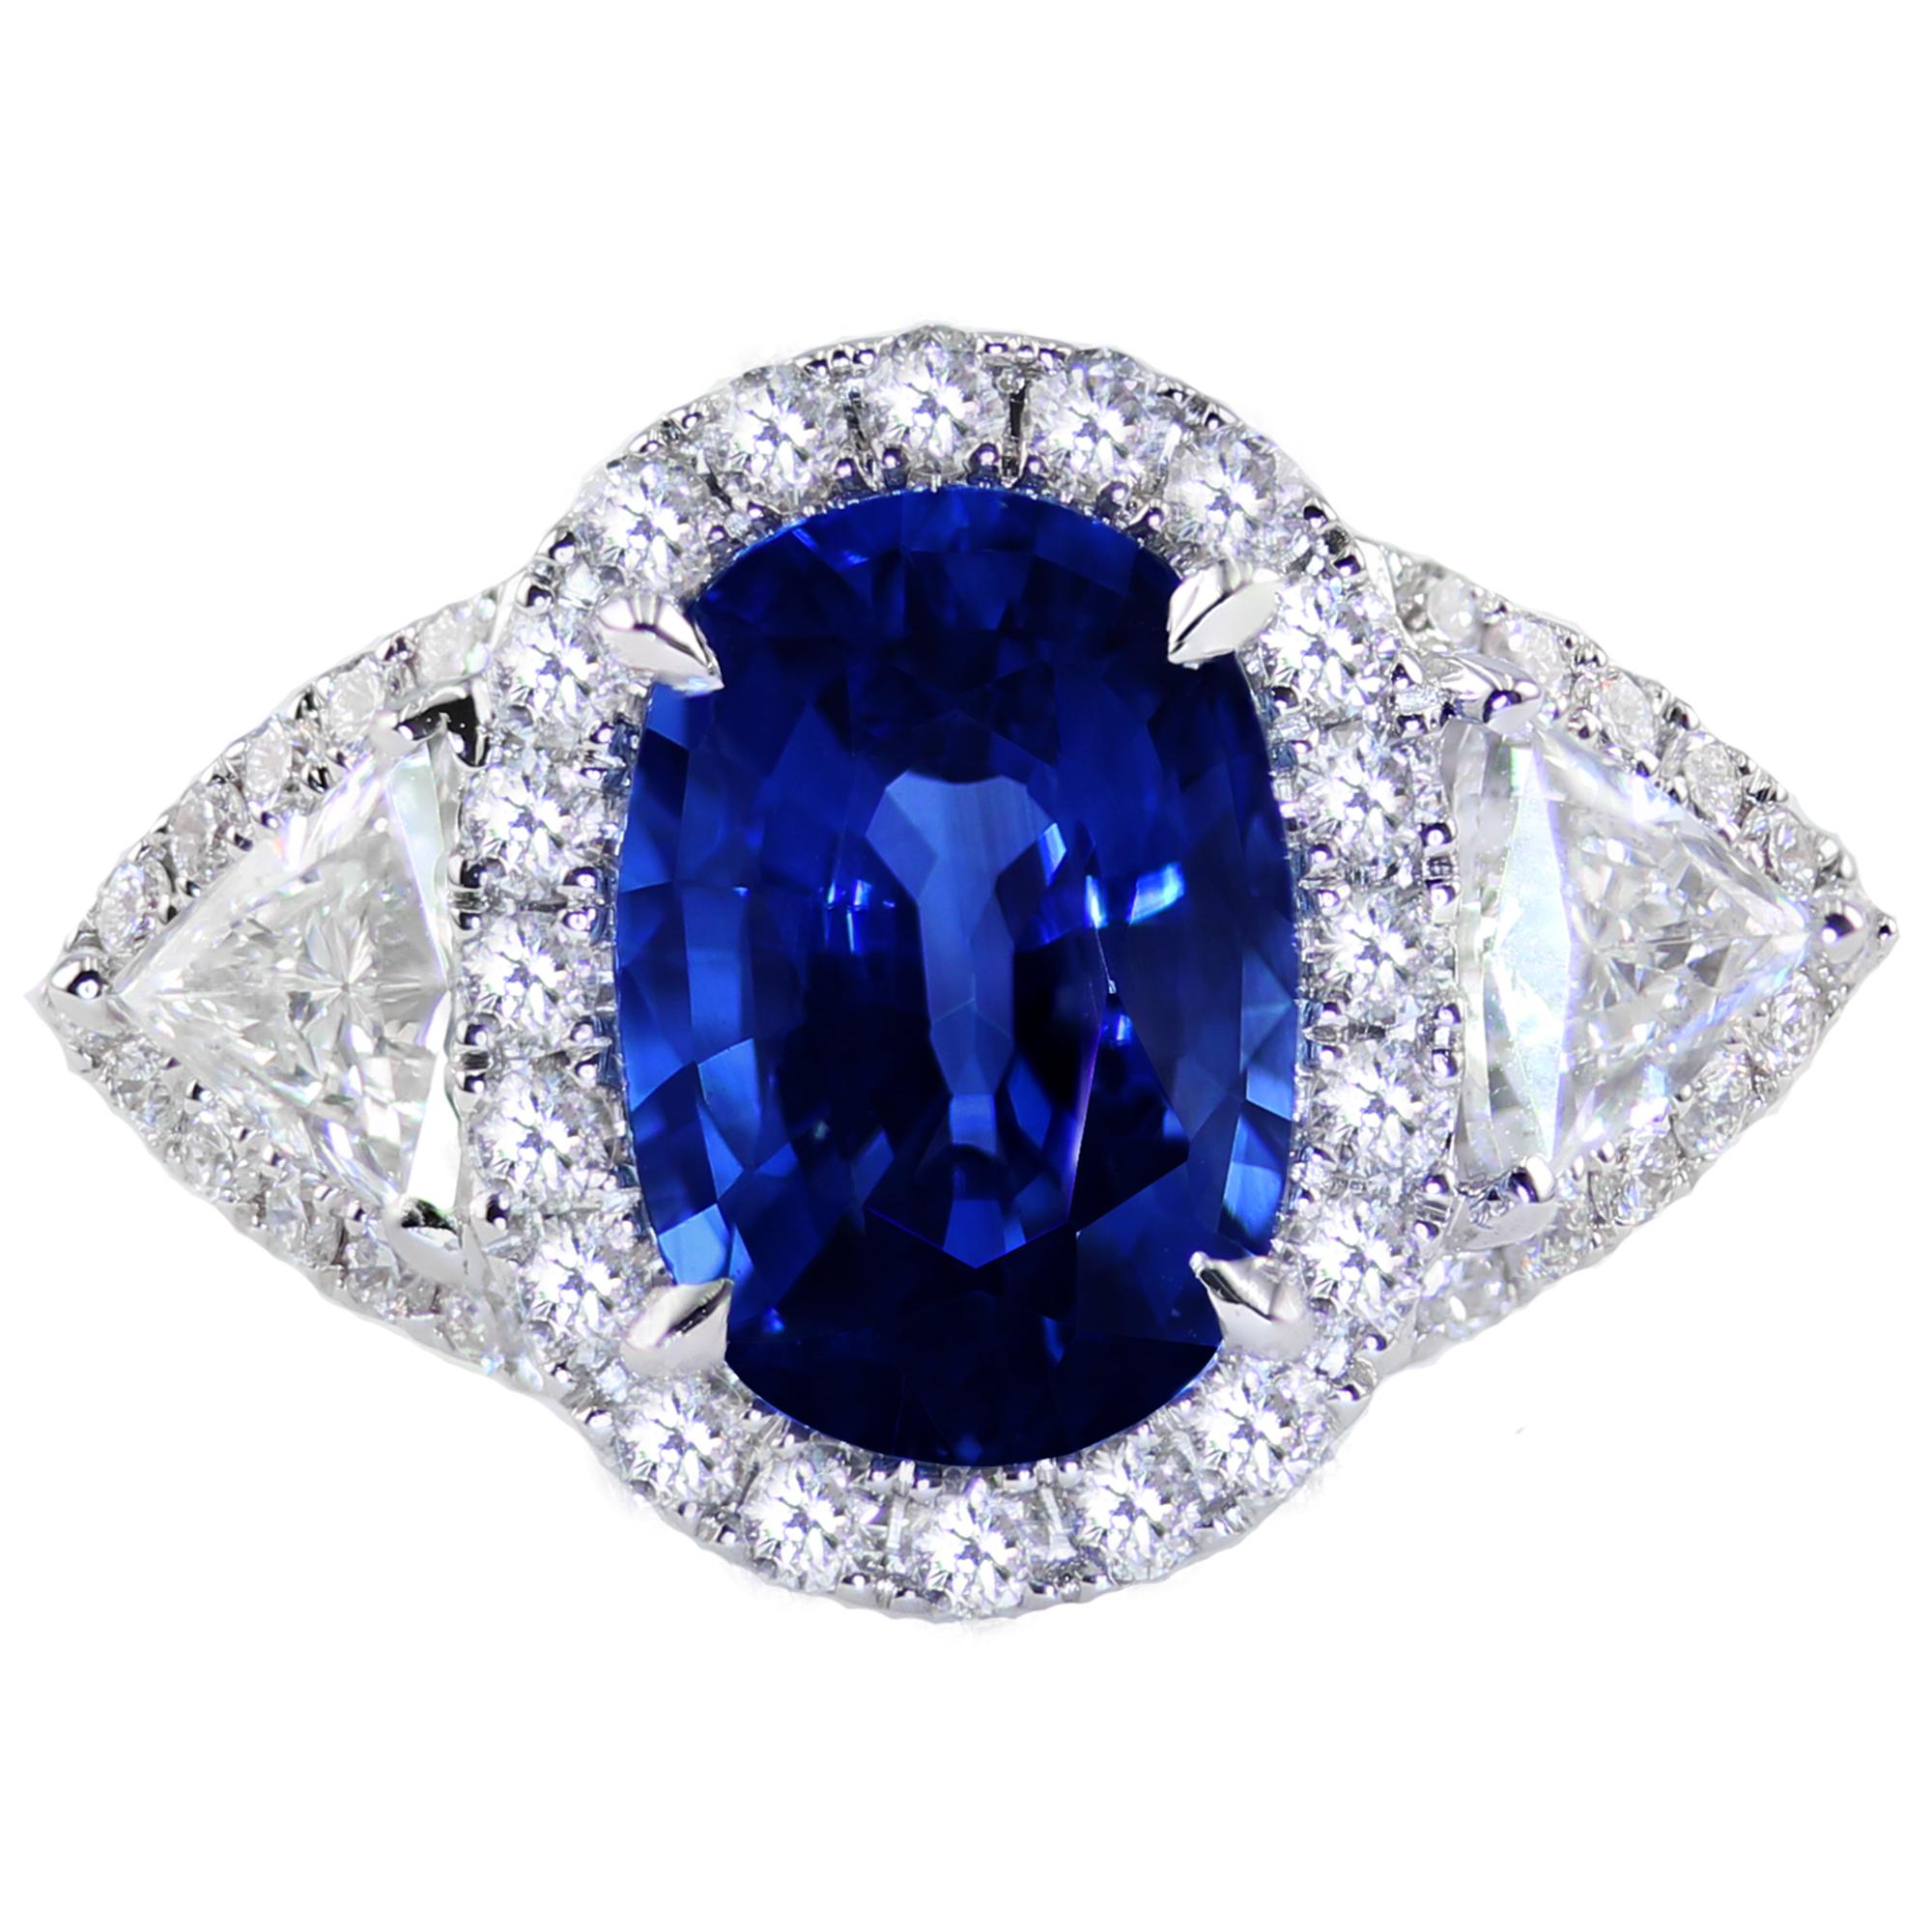 3.60 carat oval cut blue sapphire center, set between two trillion cut diamonds and 80 round diamonds (total diamond weight 1.94 carats).

Be sure to shine from every angle. This ring can be worn as a stunning engagement ring, or a beautiful right